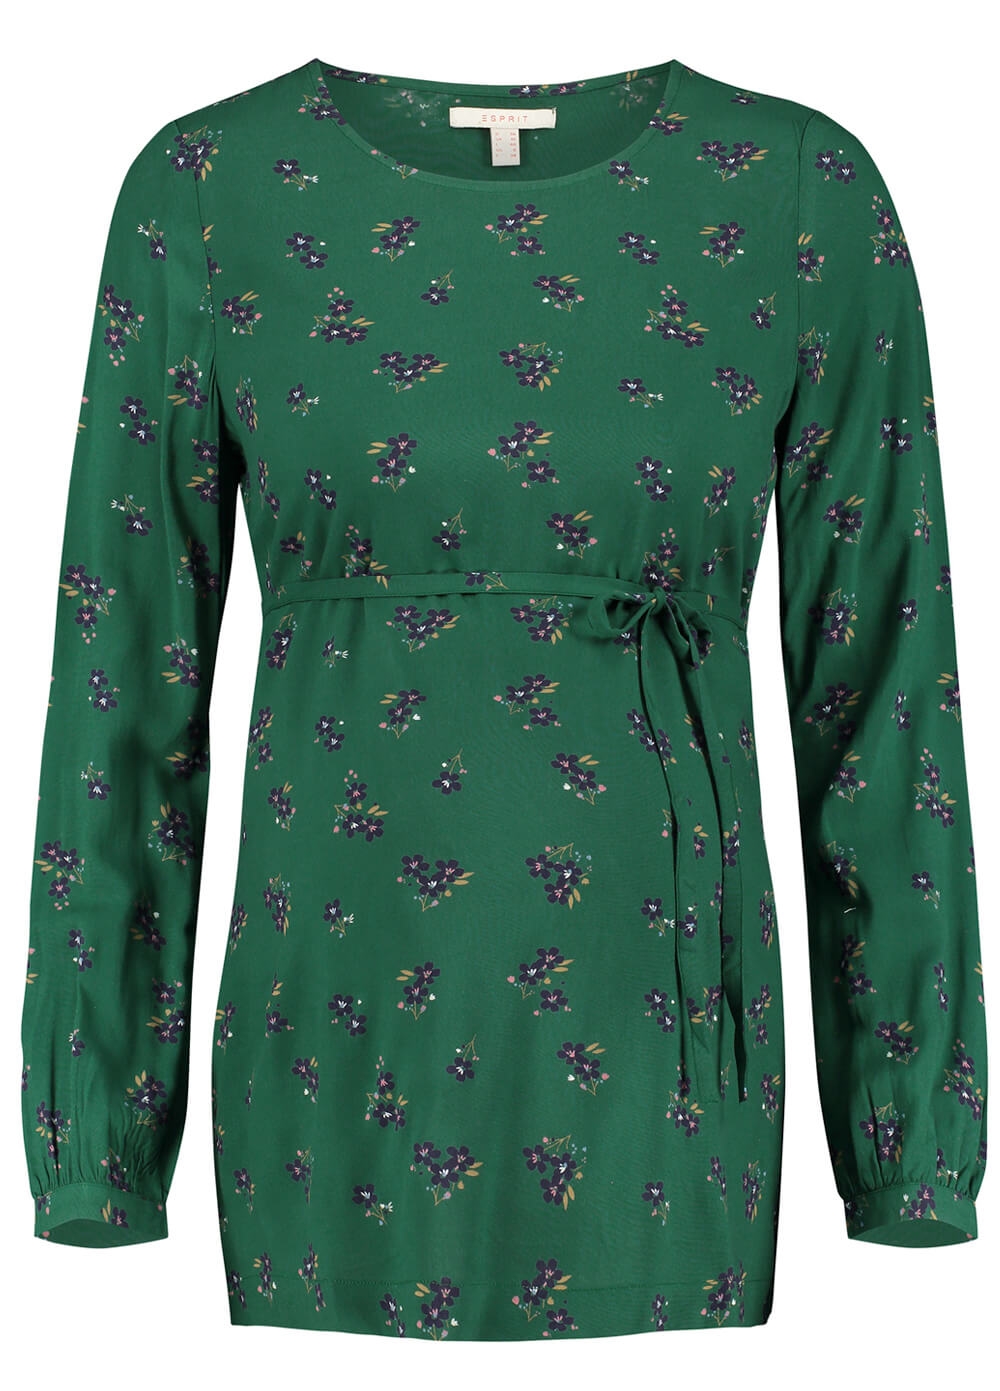 Esprit - Green Floral Viscose Maternity Blouse | Queen Bee